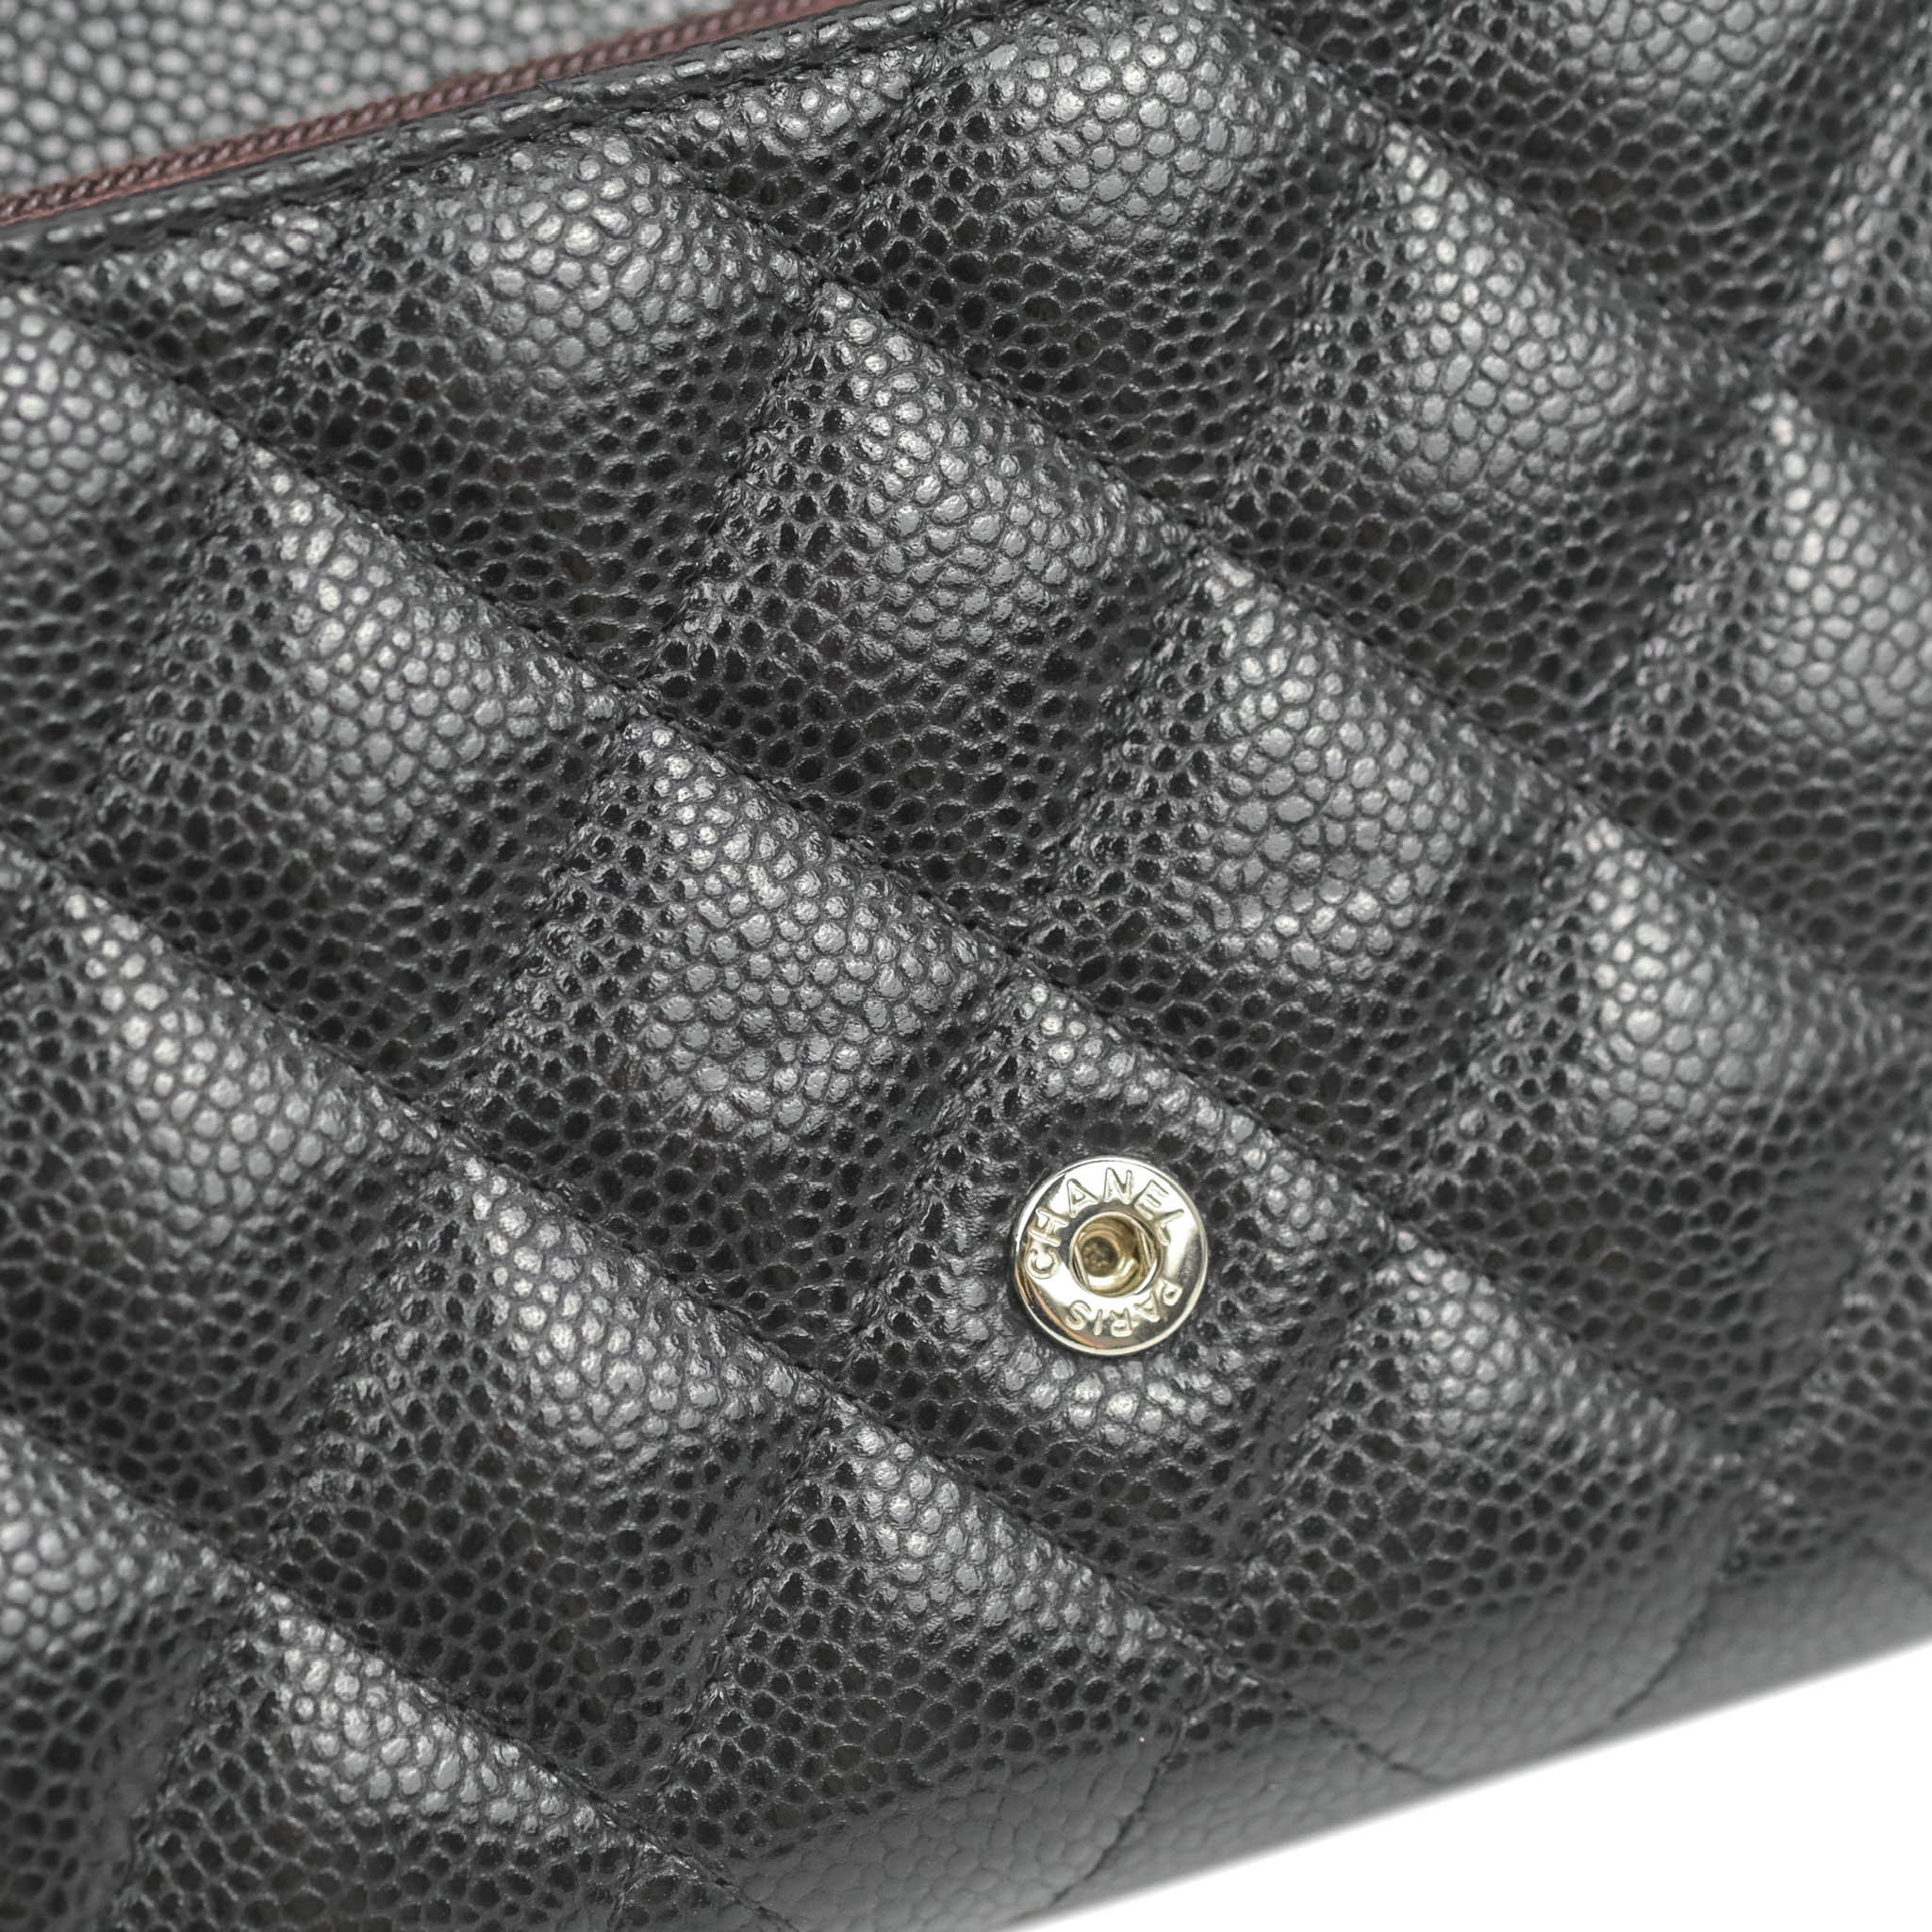 CHANEL Black Caviar French Wallet GHW_Chanel_BRANDS_MILAN CLASSIC